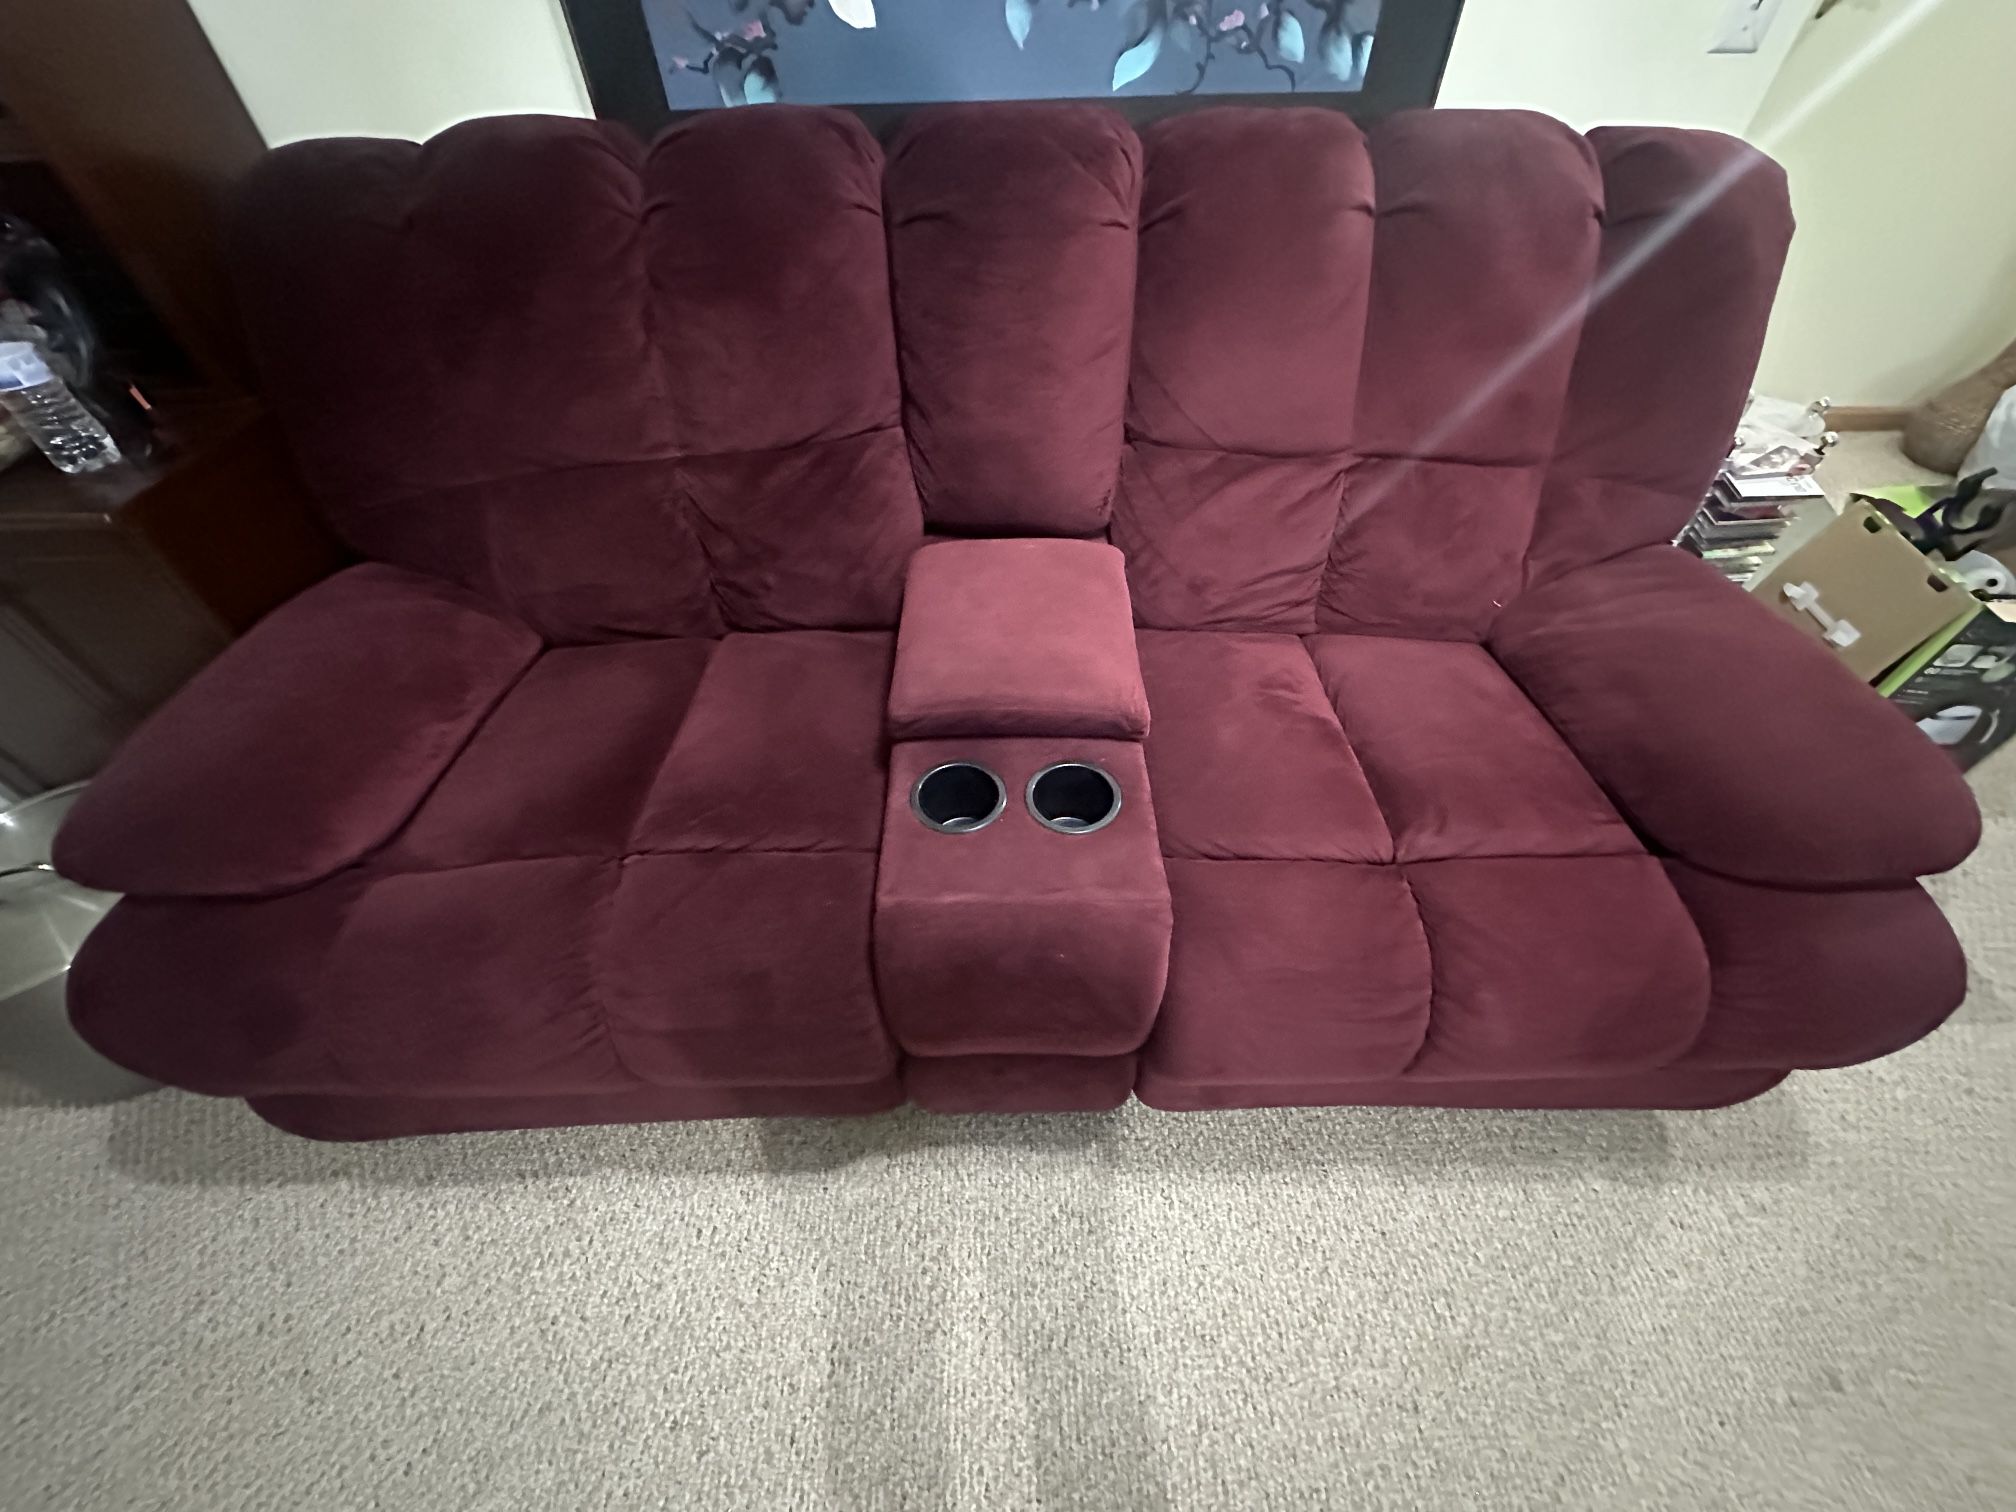 Sofas/couches For Sale